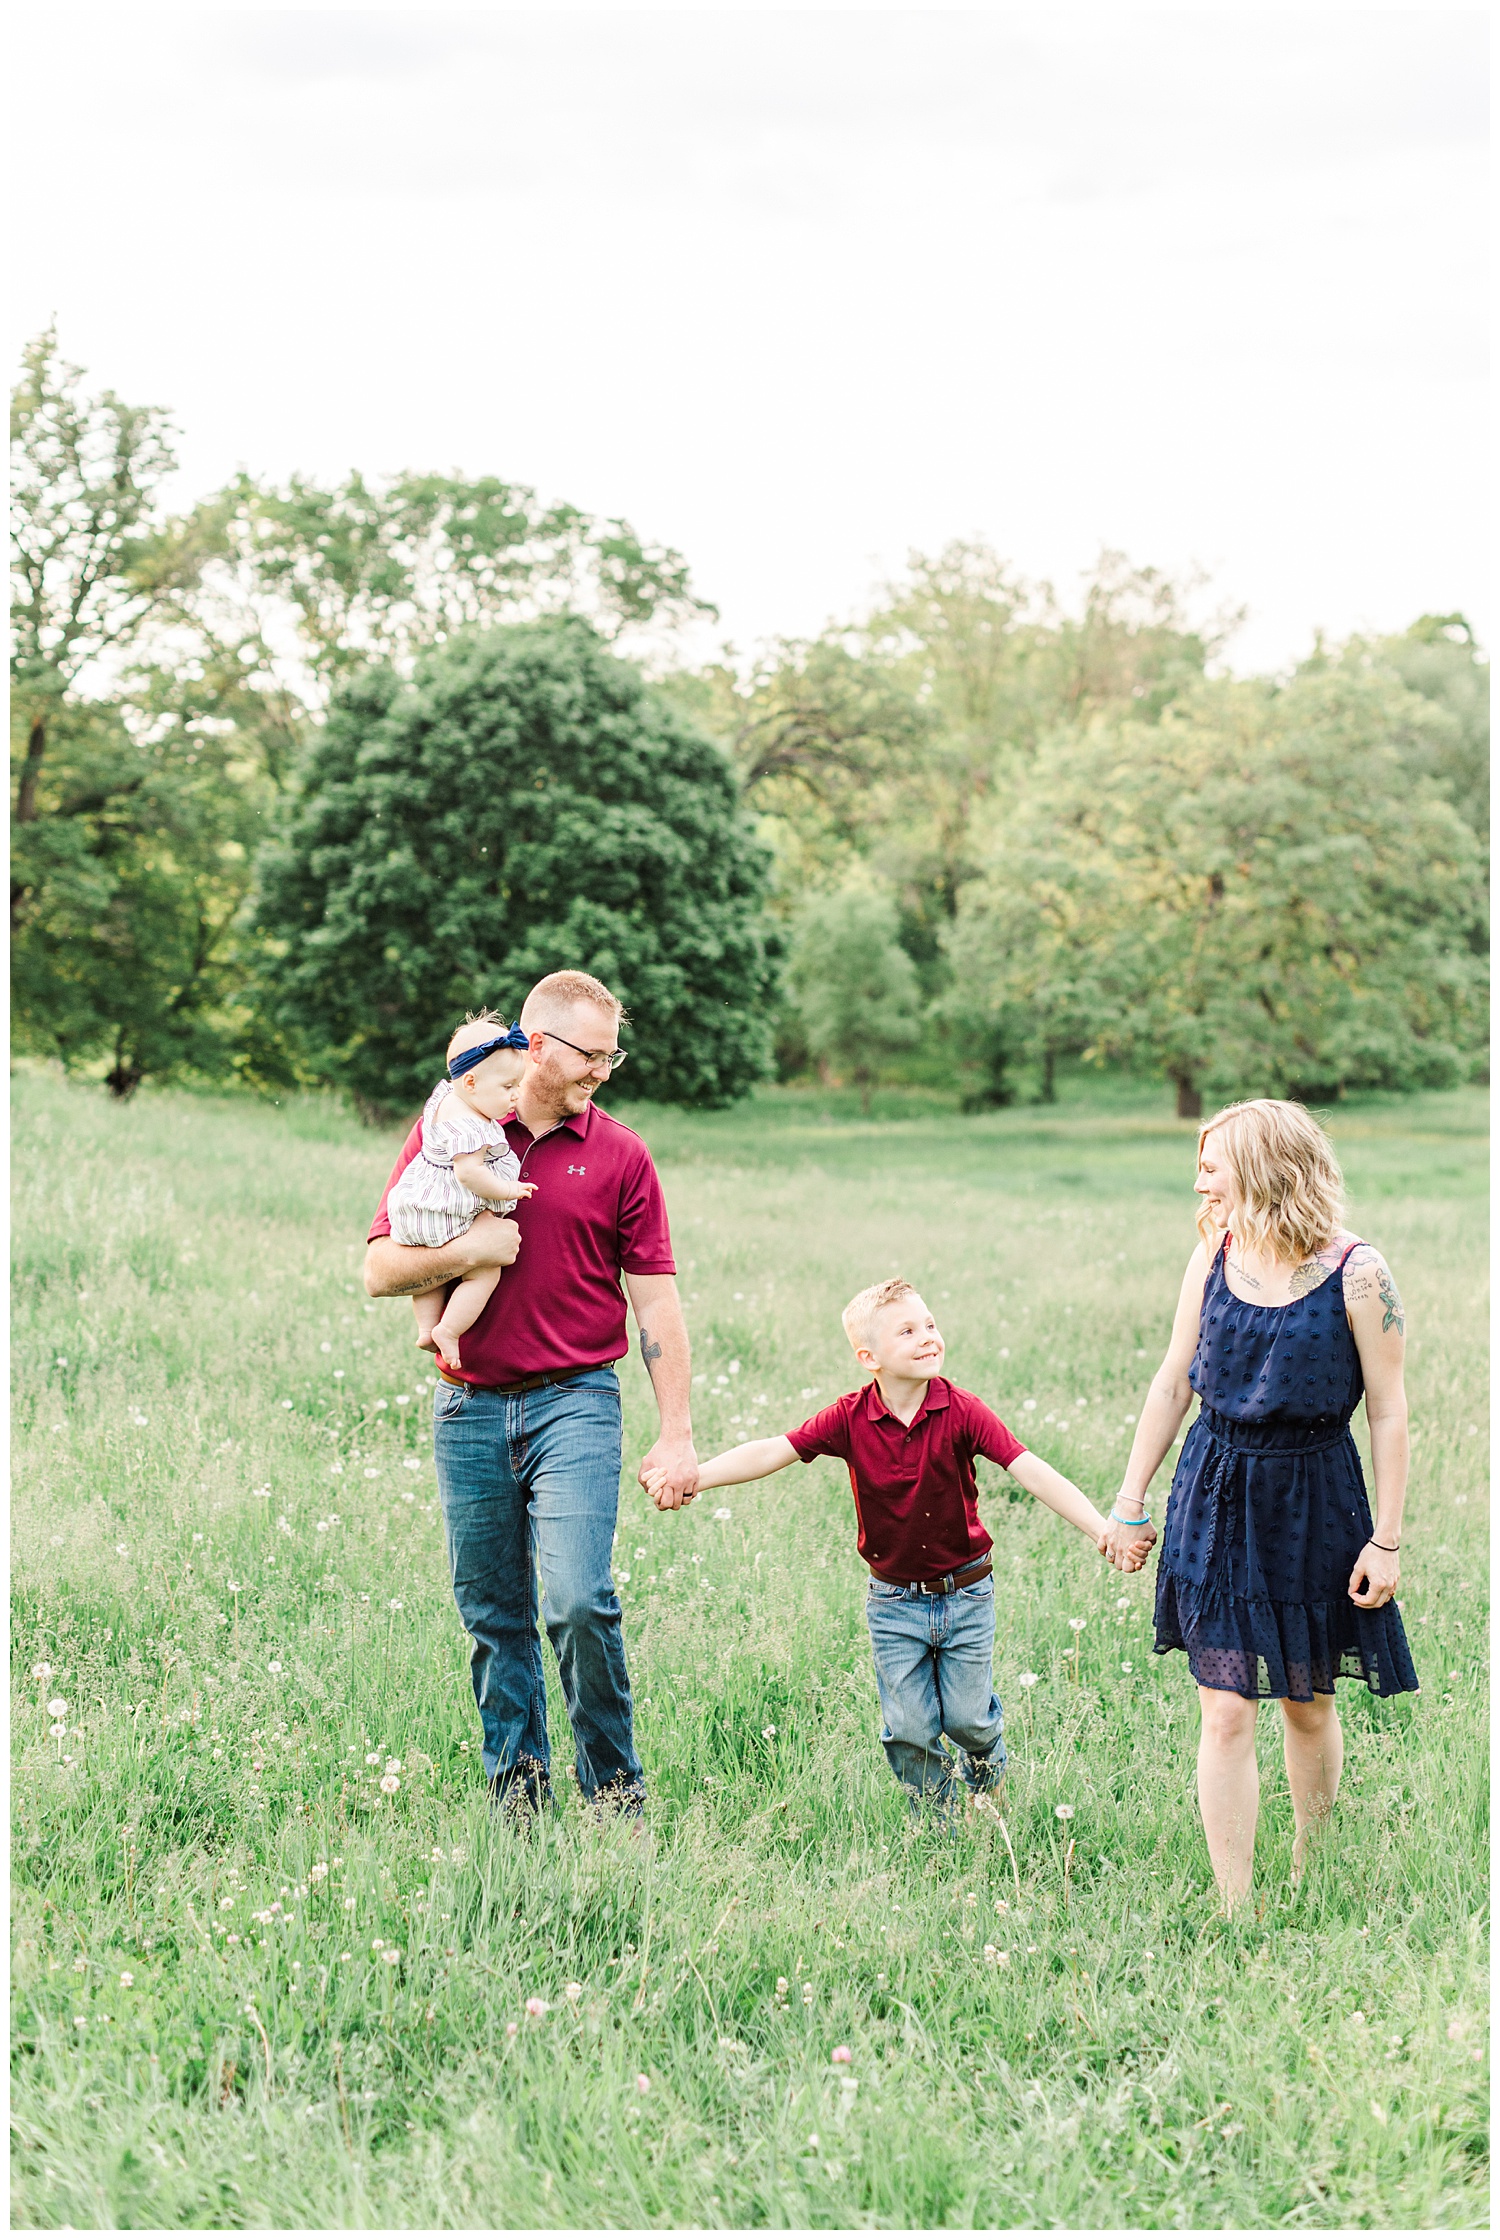 Family walks hand in hand in a grassy pasture with rolling hills in Iowa | CB Studio